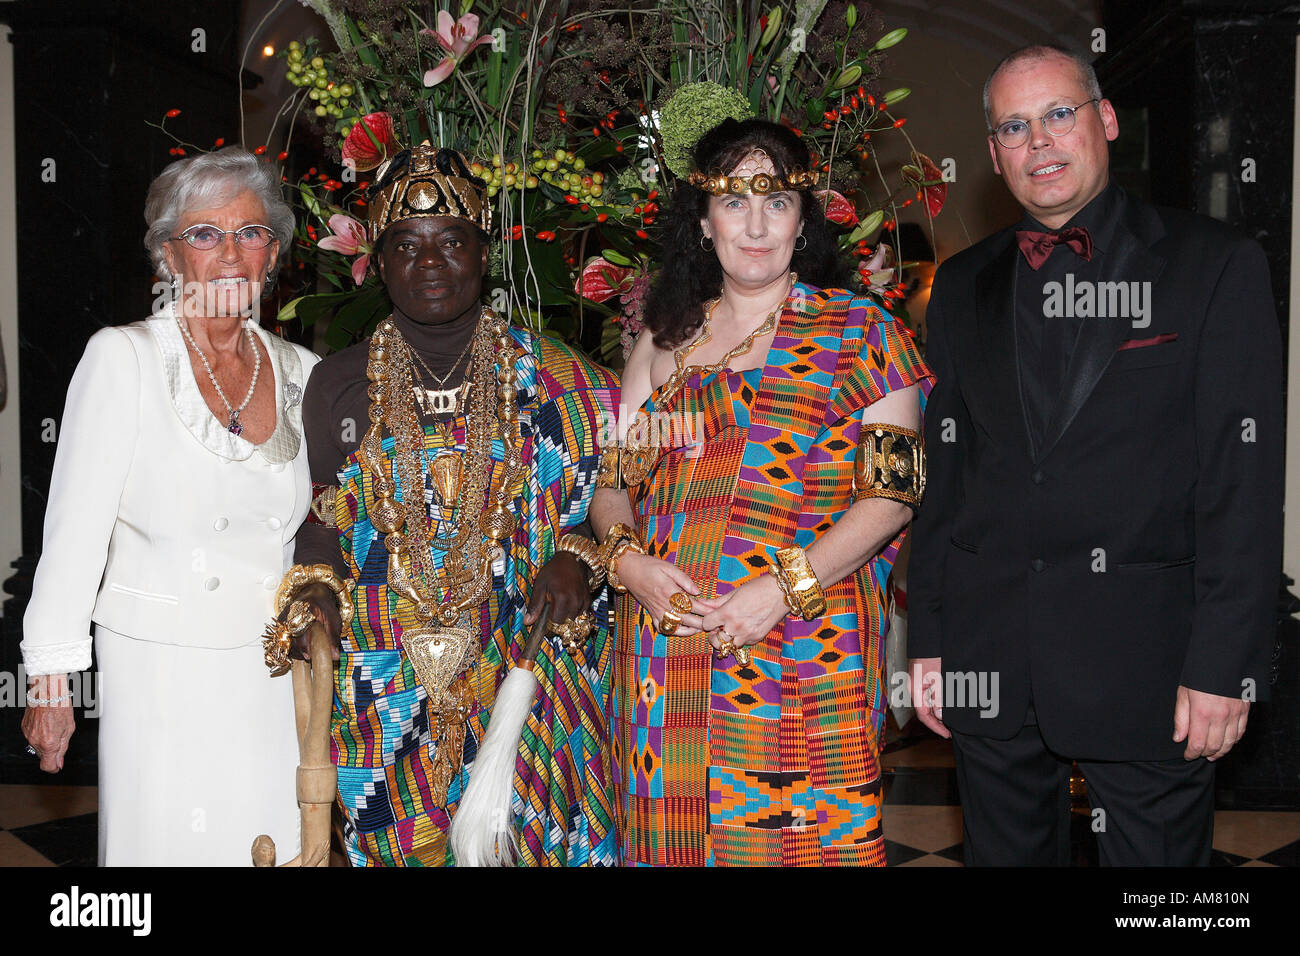 Charity event in Schloss Bensberg, from left Charlotte Feindt, King Bansah of Hohoe Ghana with his wife Gabriele, Steffen Ciesi Stock Photo